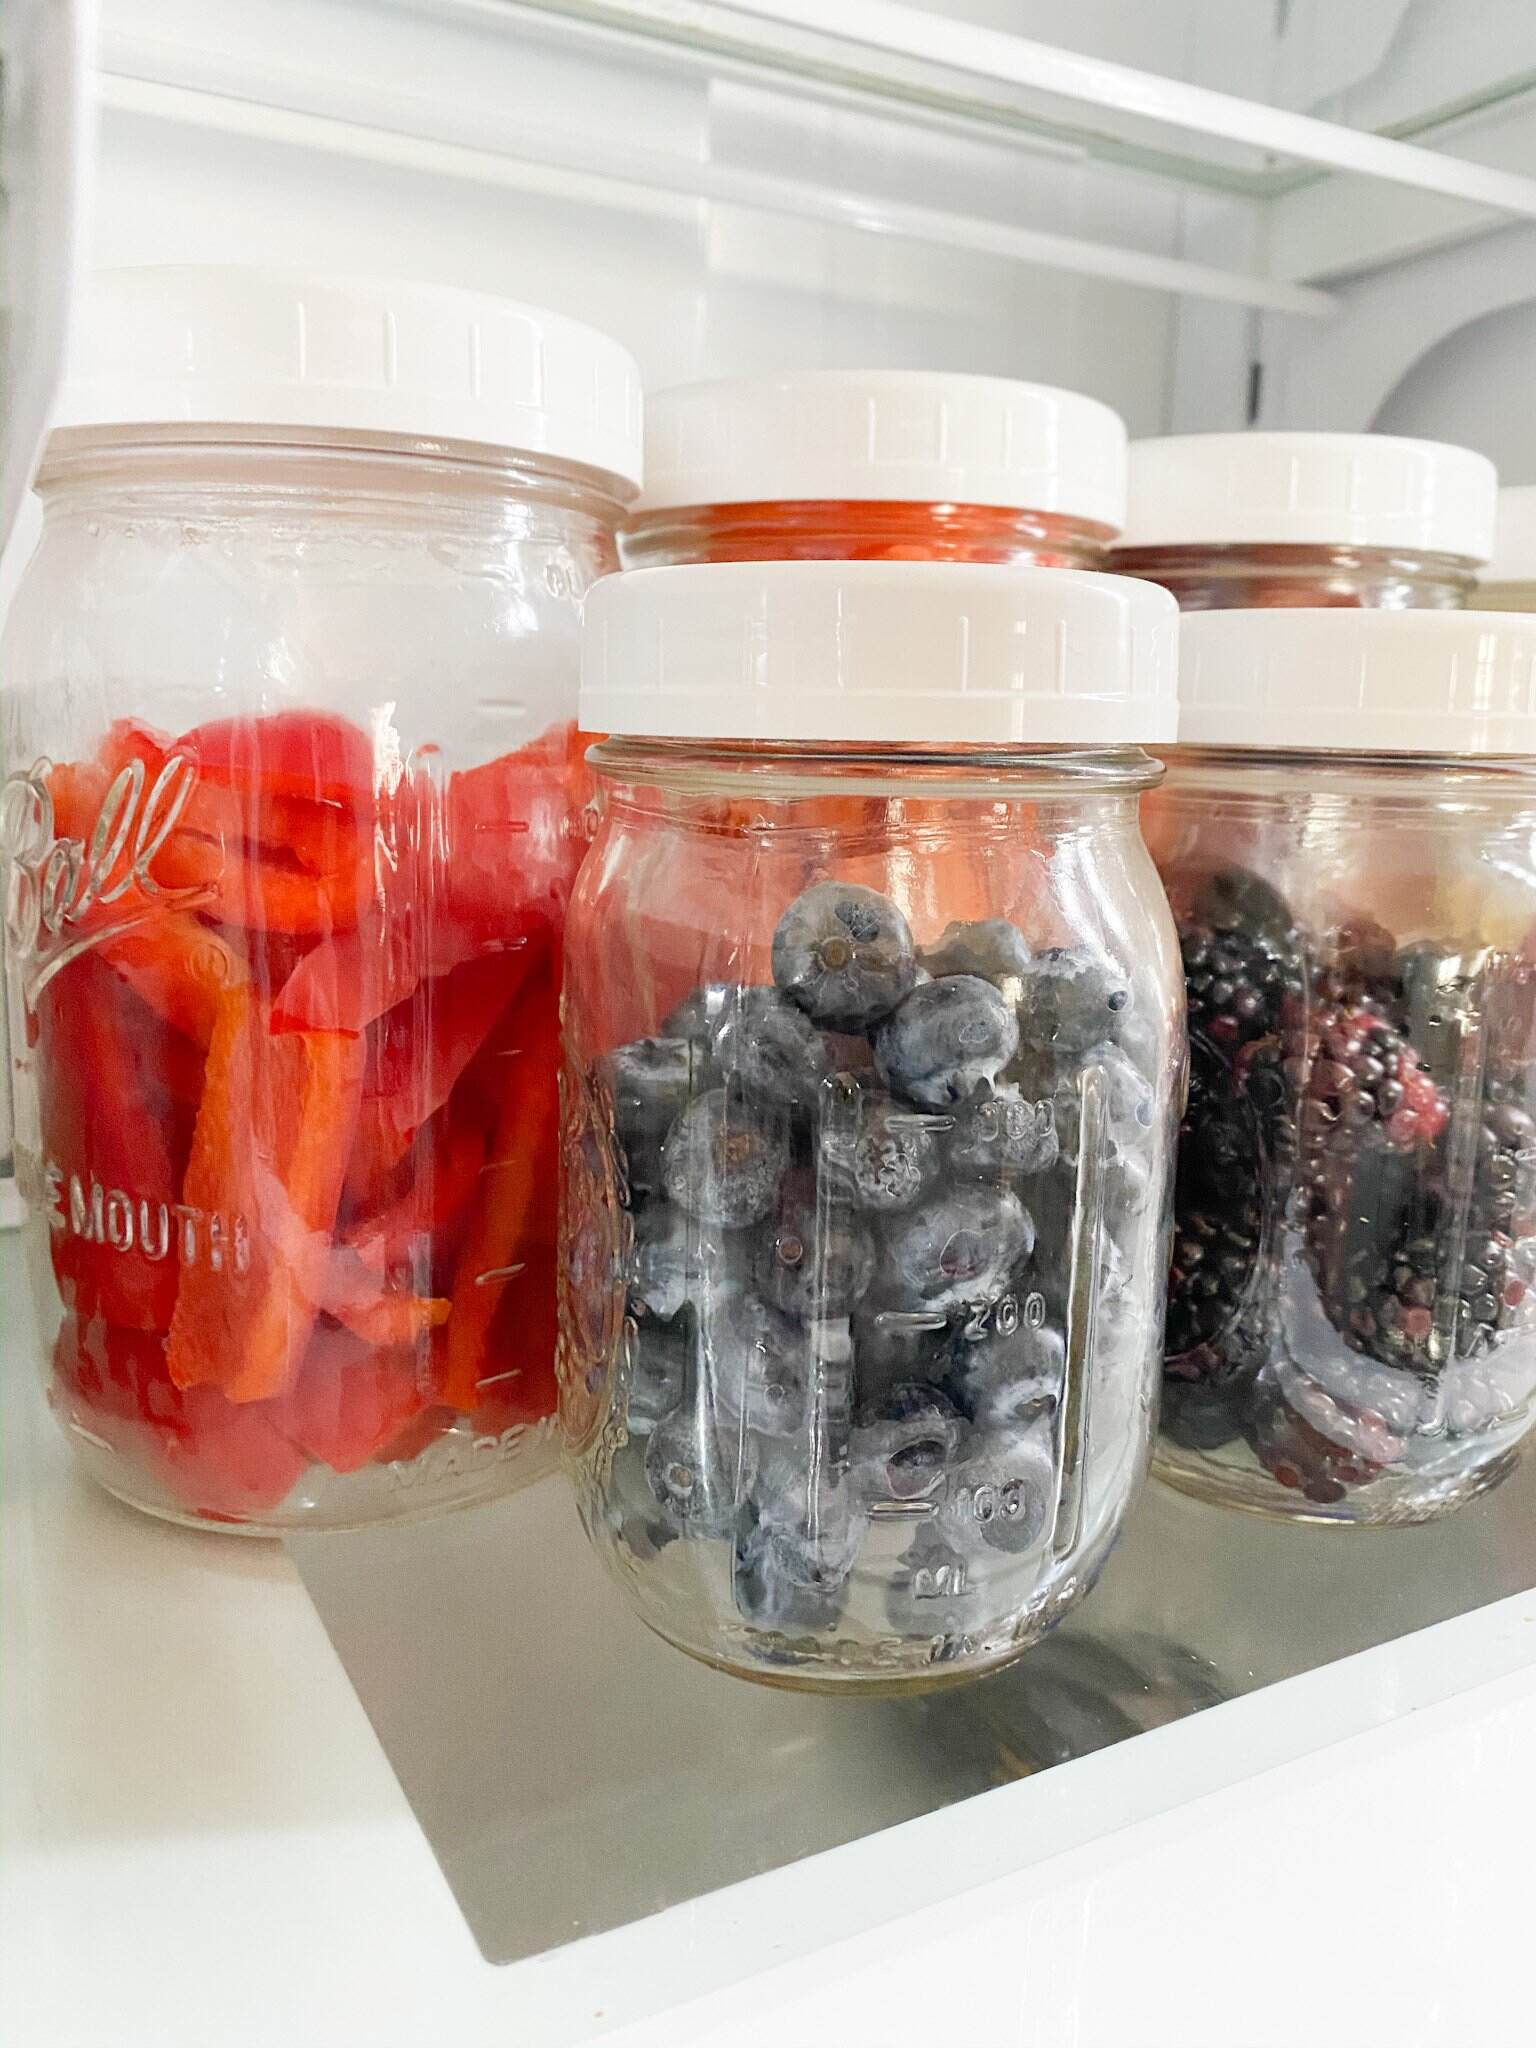 How To Store Fruit To Last Longer